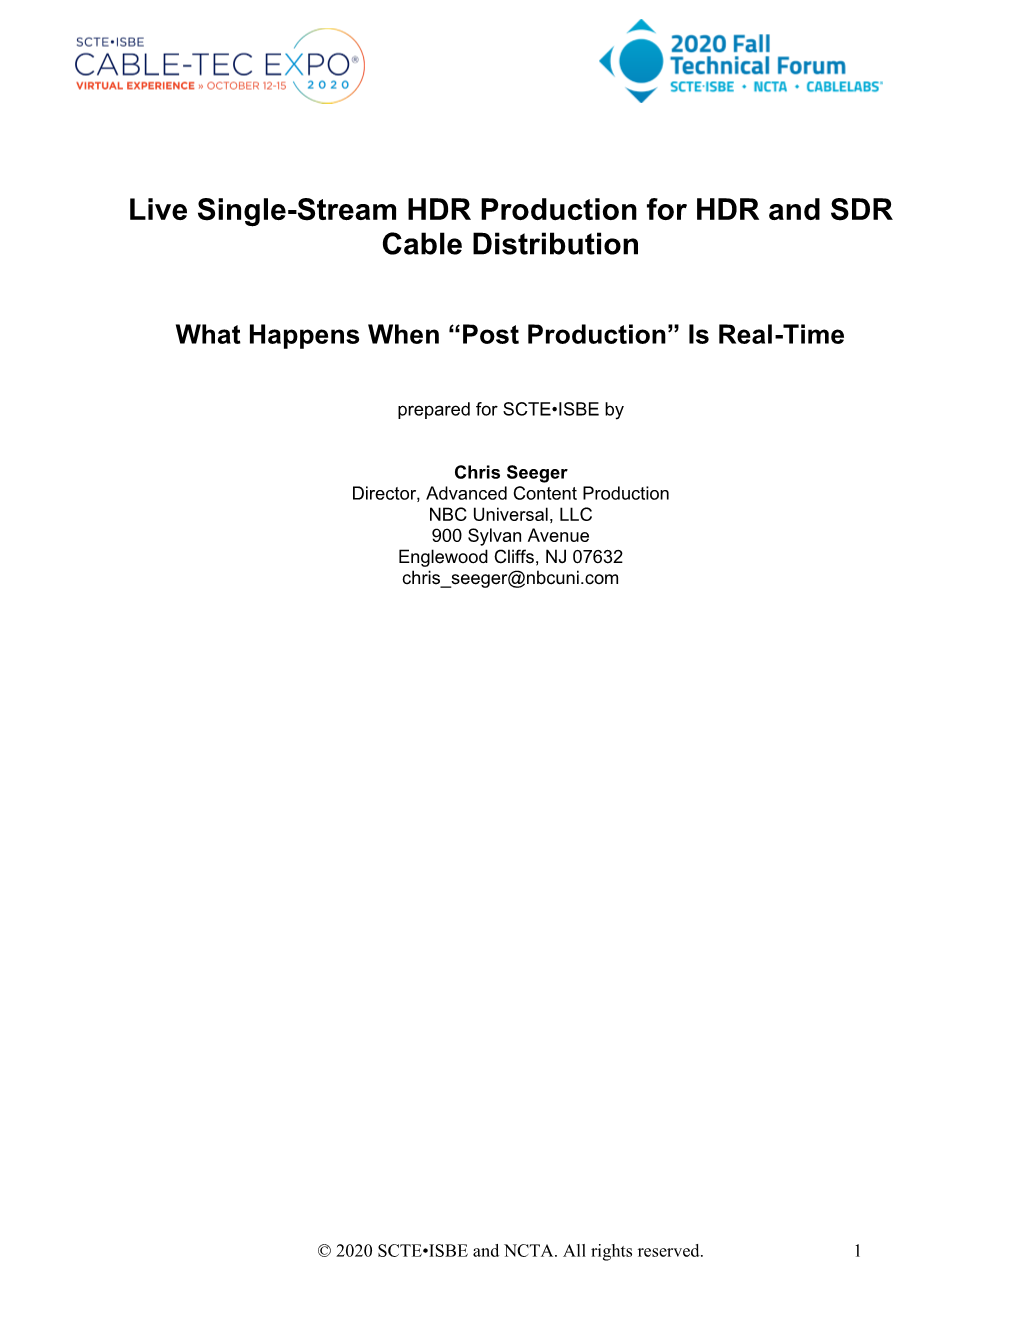 Live Single-Stream HDR Production for HDR and SDR Cable Distribution